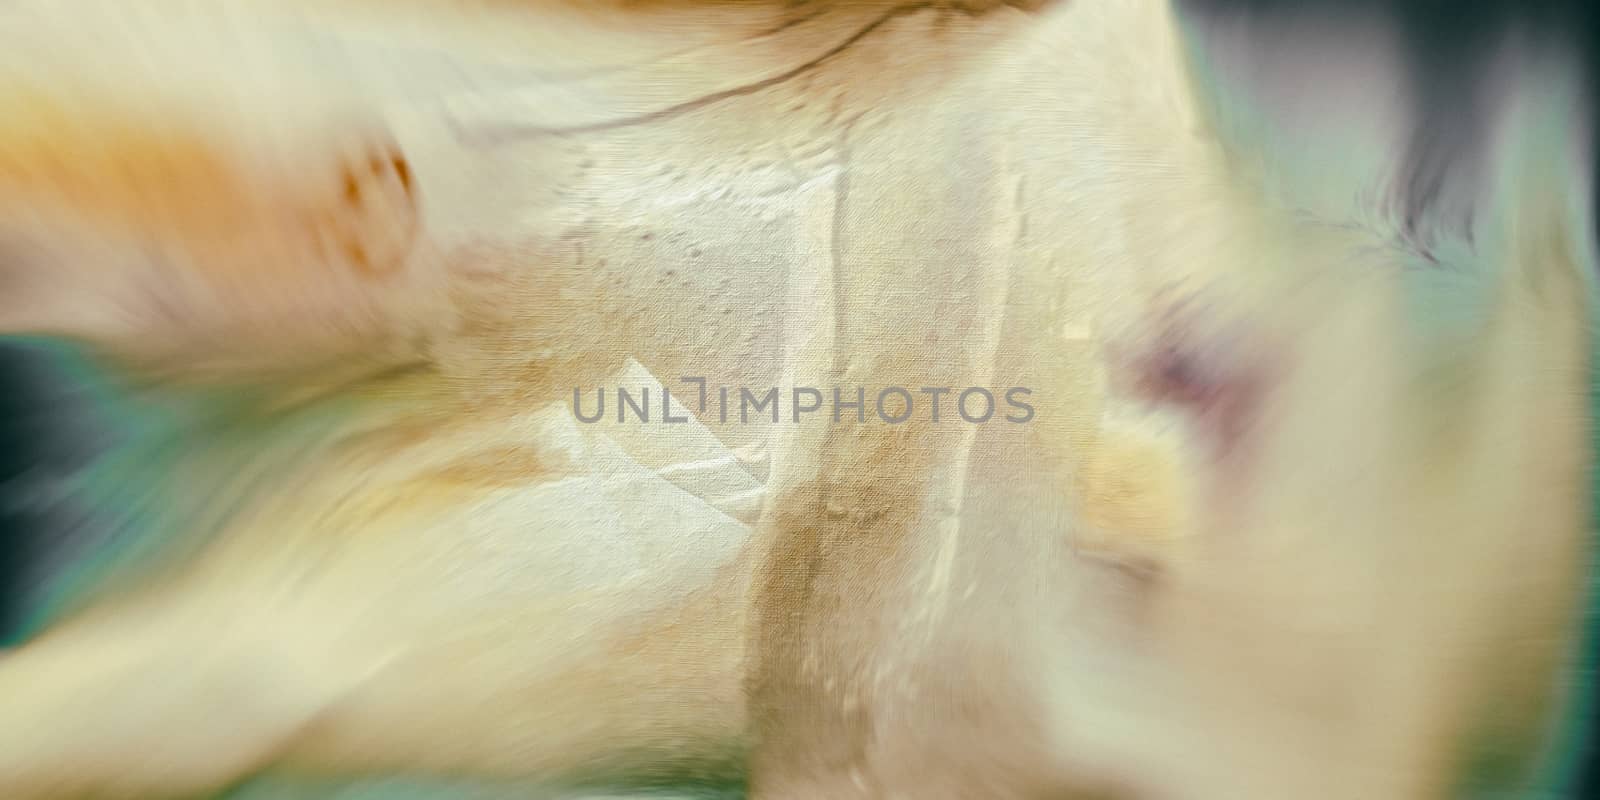 Abstract composition in soft colors by applesstock